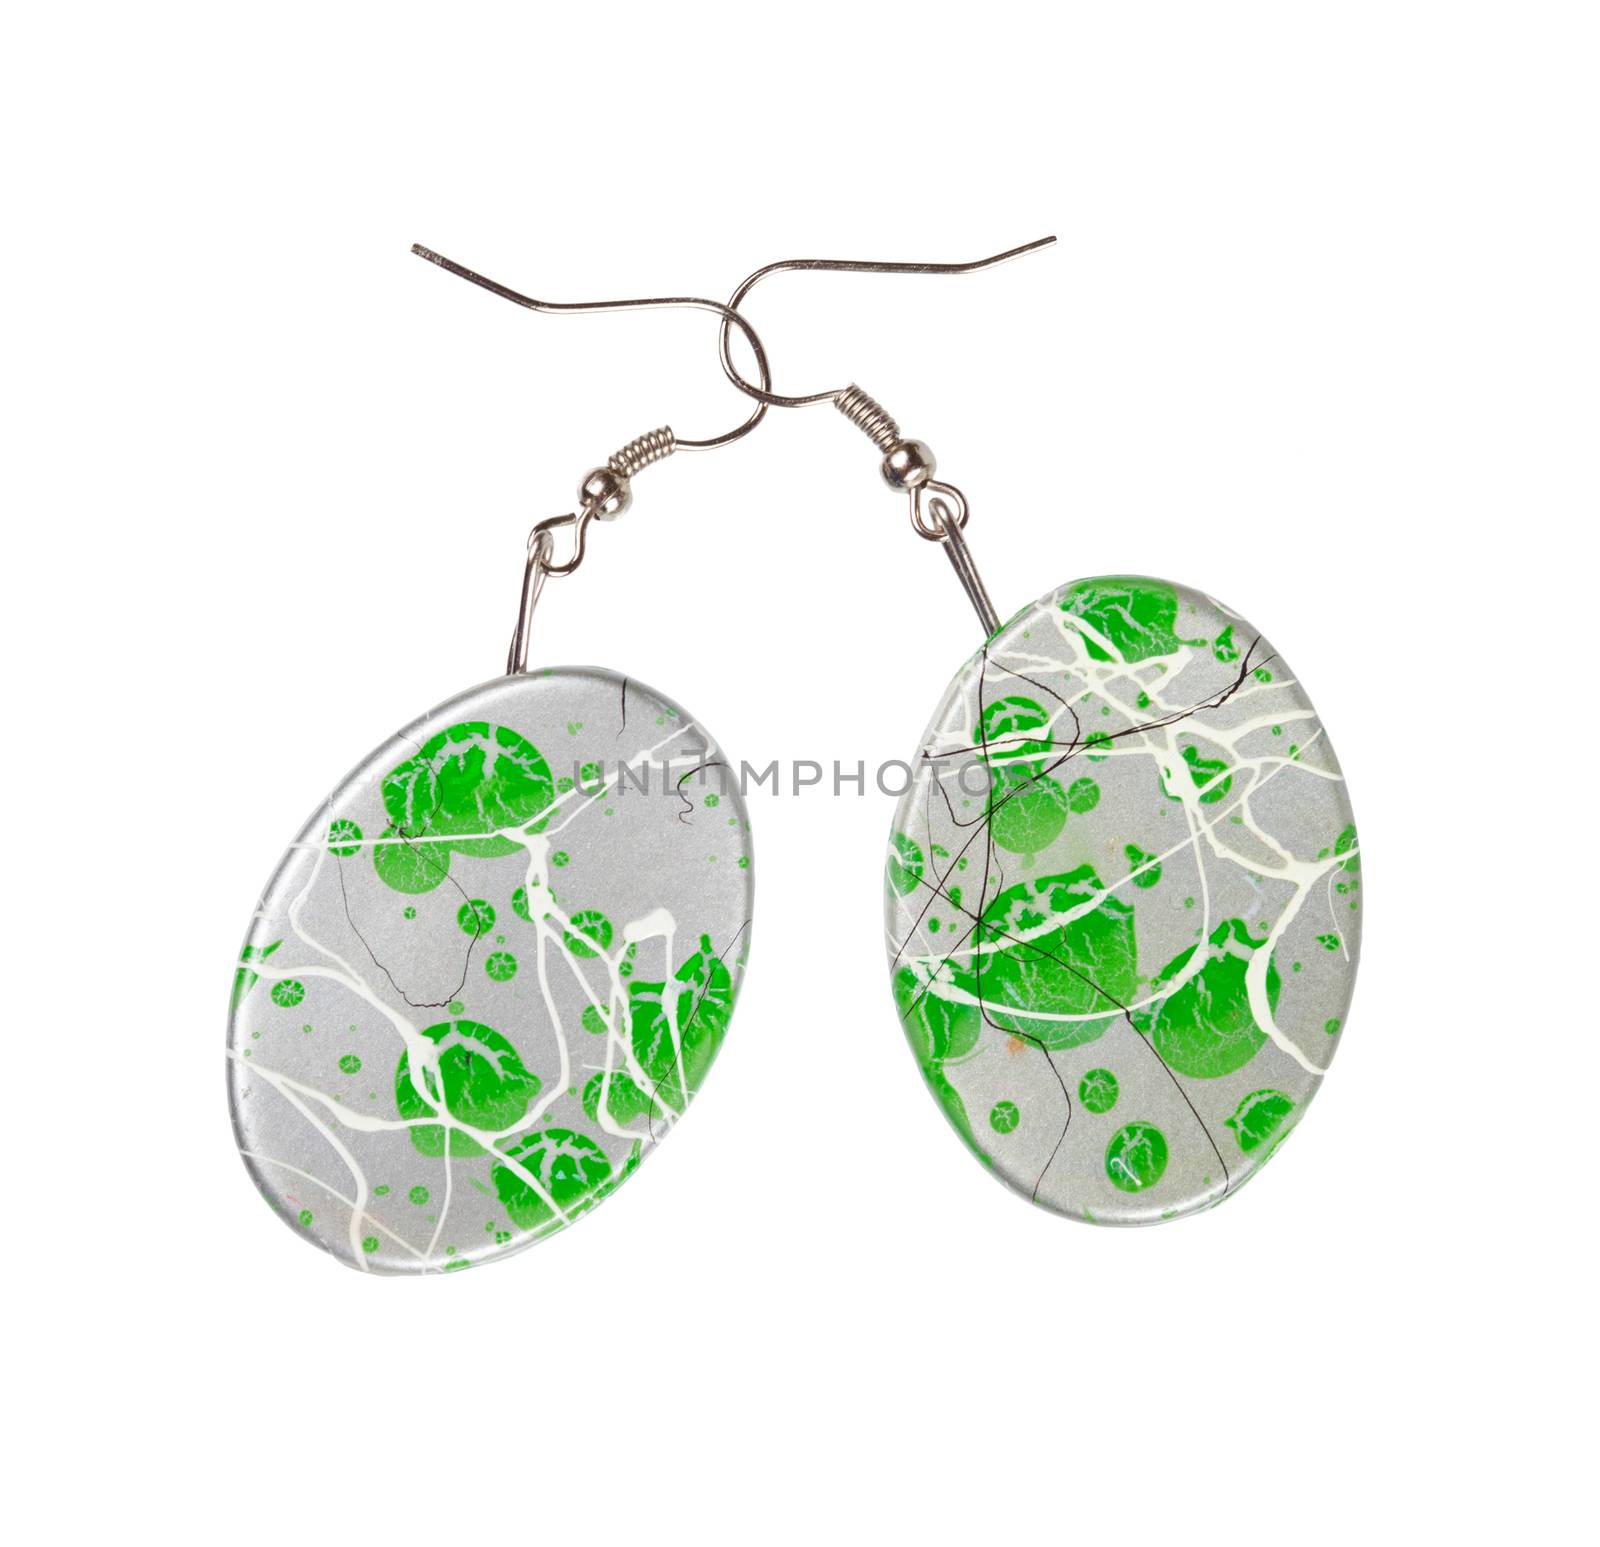 Plastic oval-shaped earrings with abstract pattern. Isolated on white background